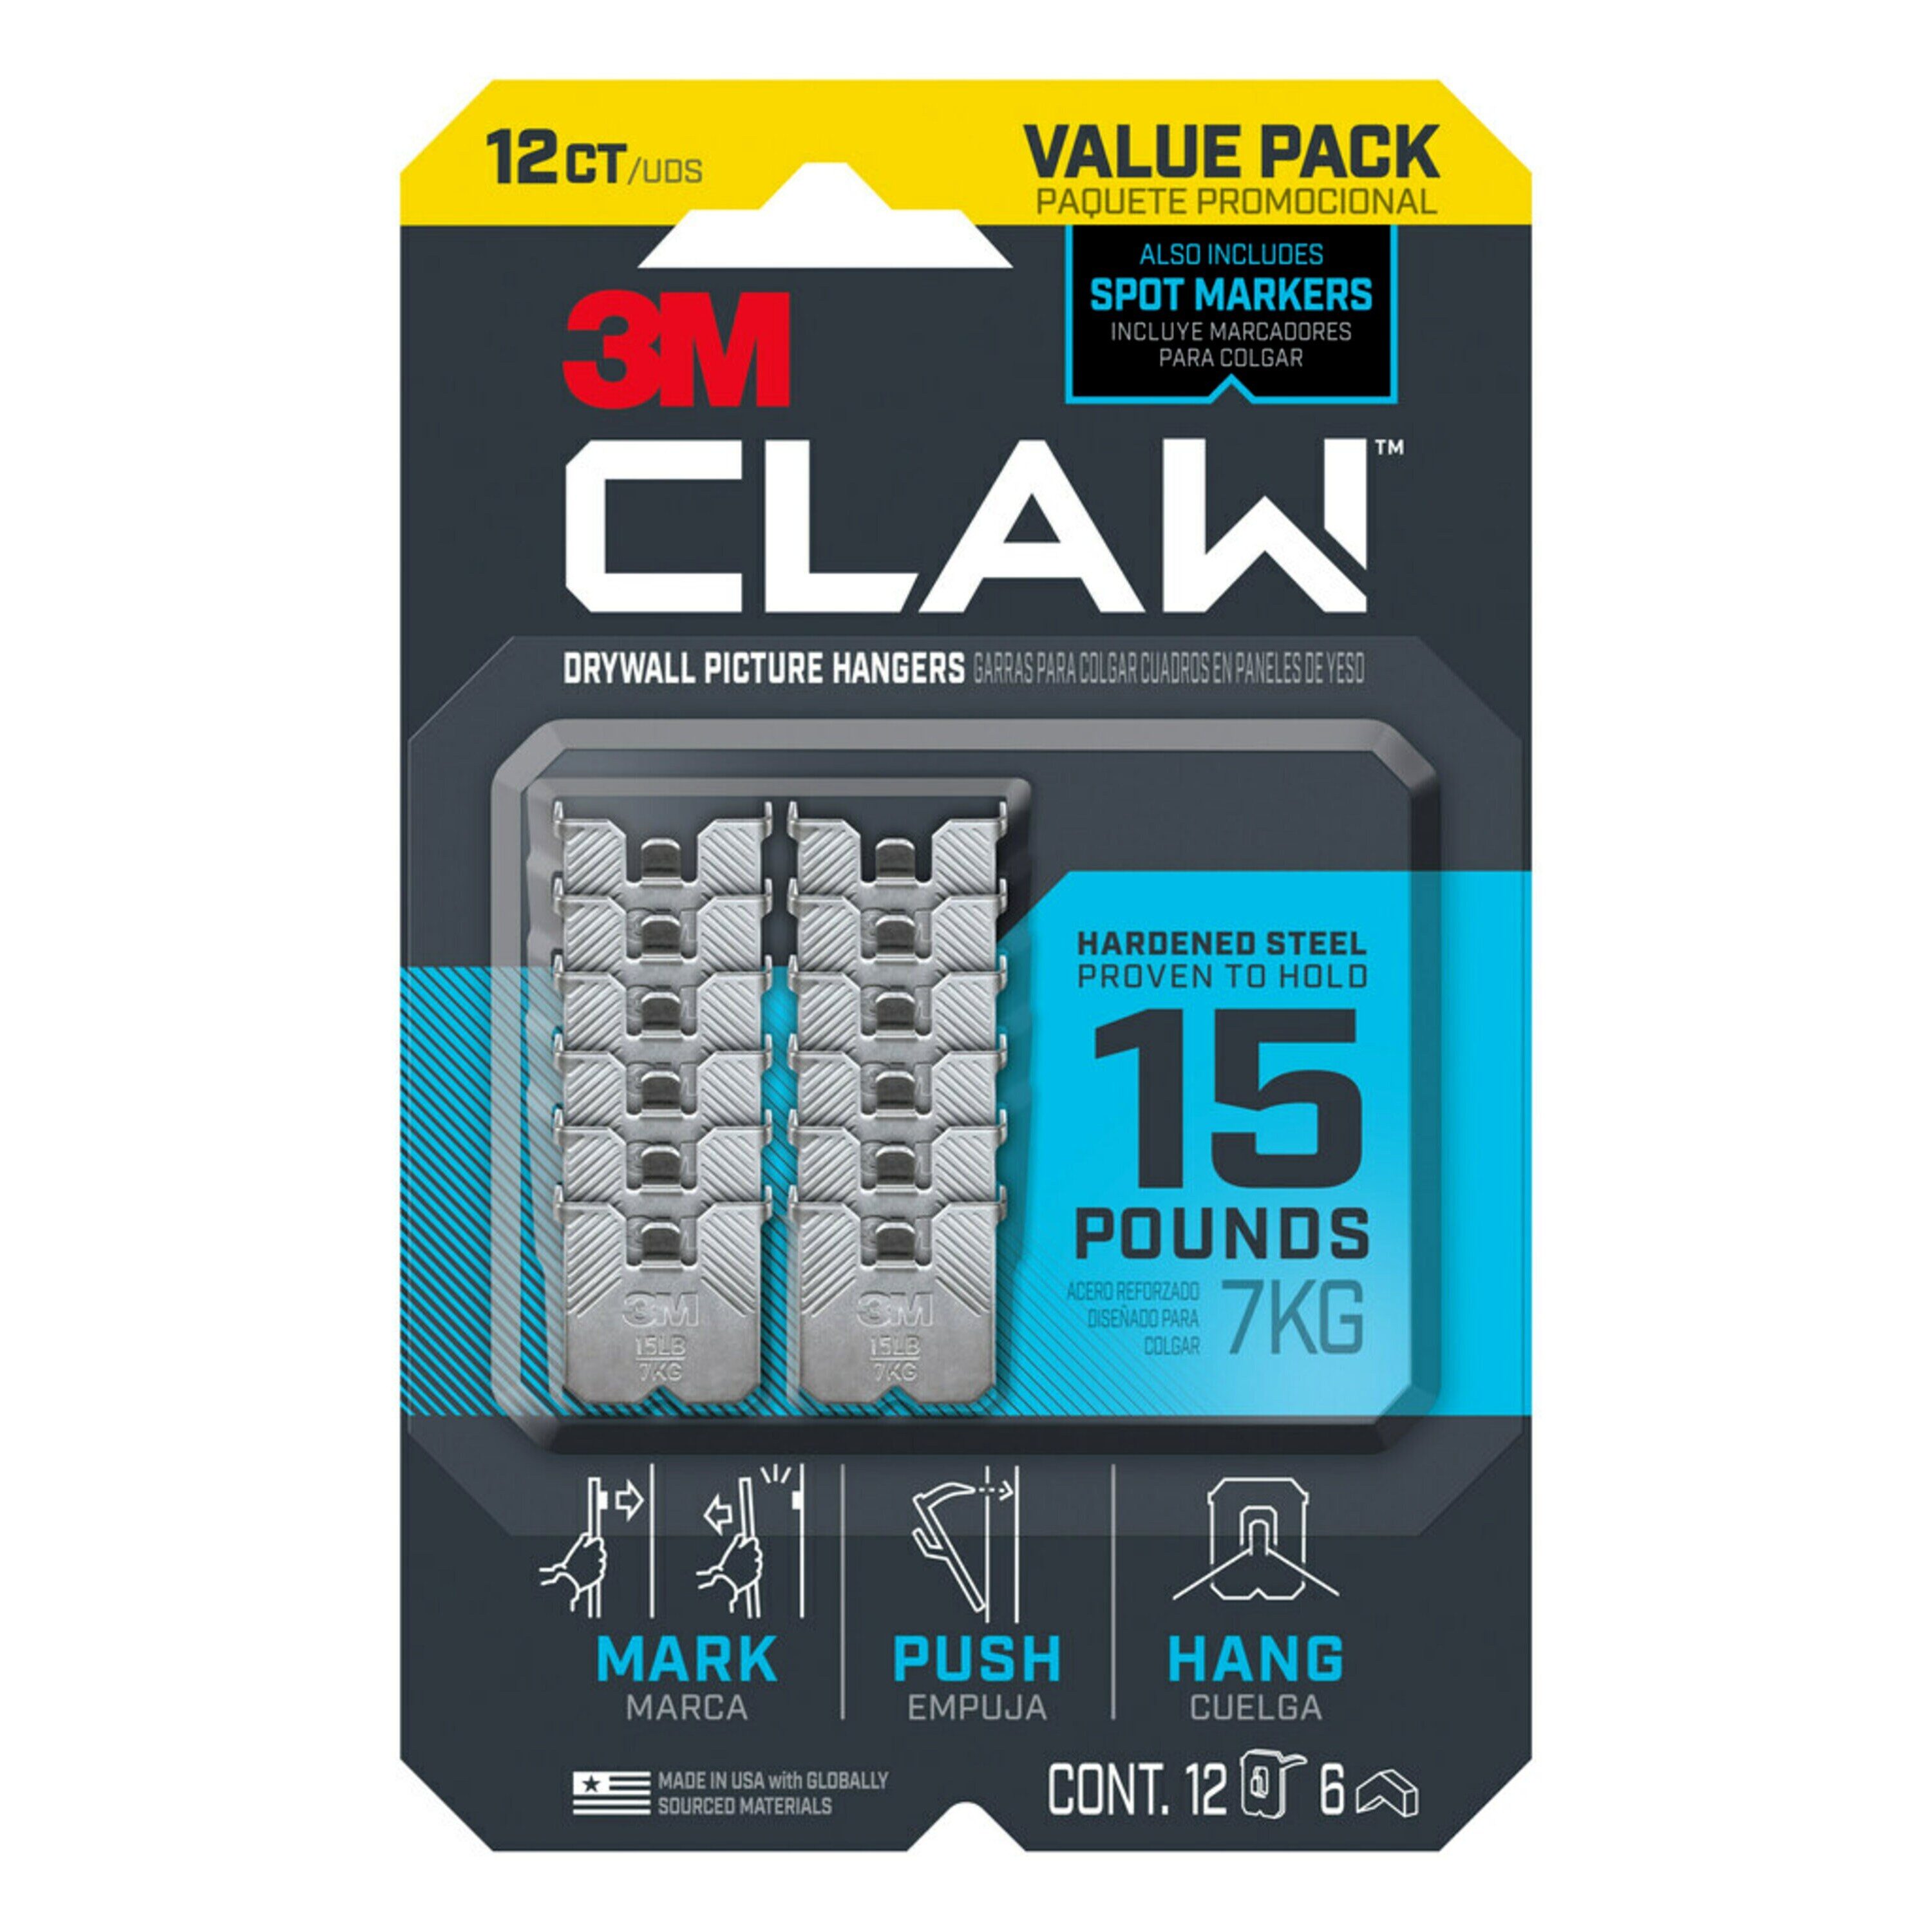 3M Claw Drywall Picture Hanger, 45 lb, 3-Pack